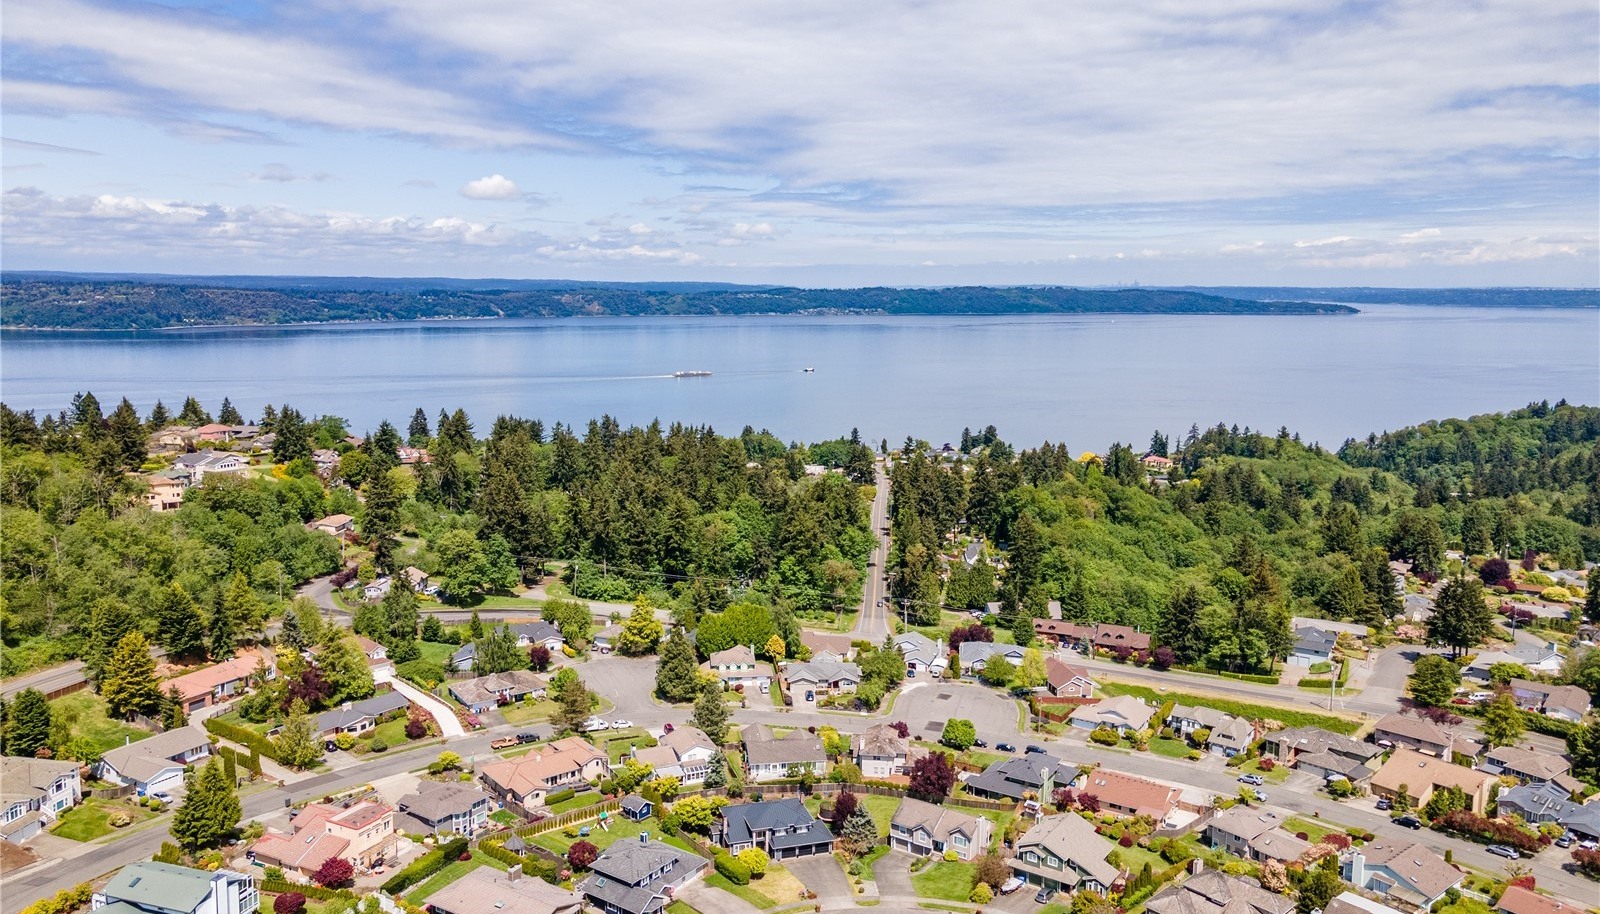 Coveted Dash Point Estates - close to beaches, hiking trails, and parks, this neighborhood is a delightful place to call home.